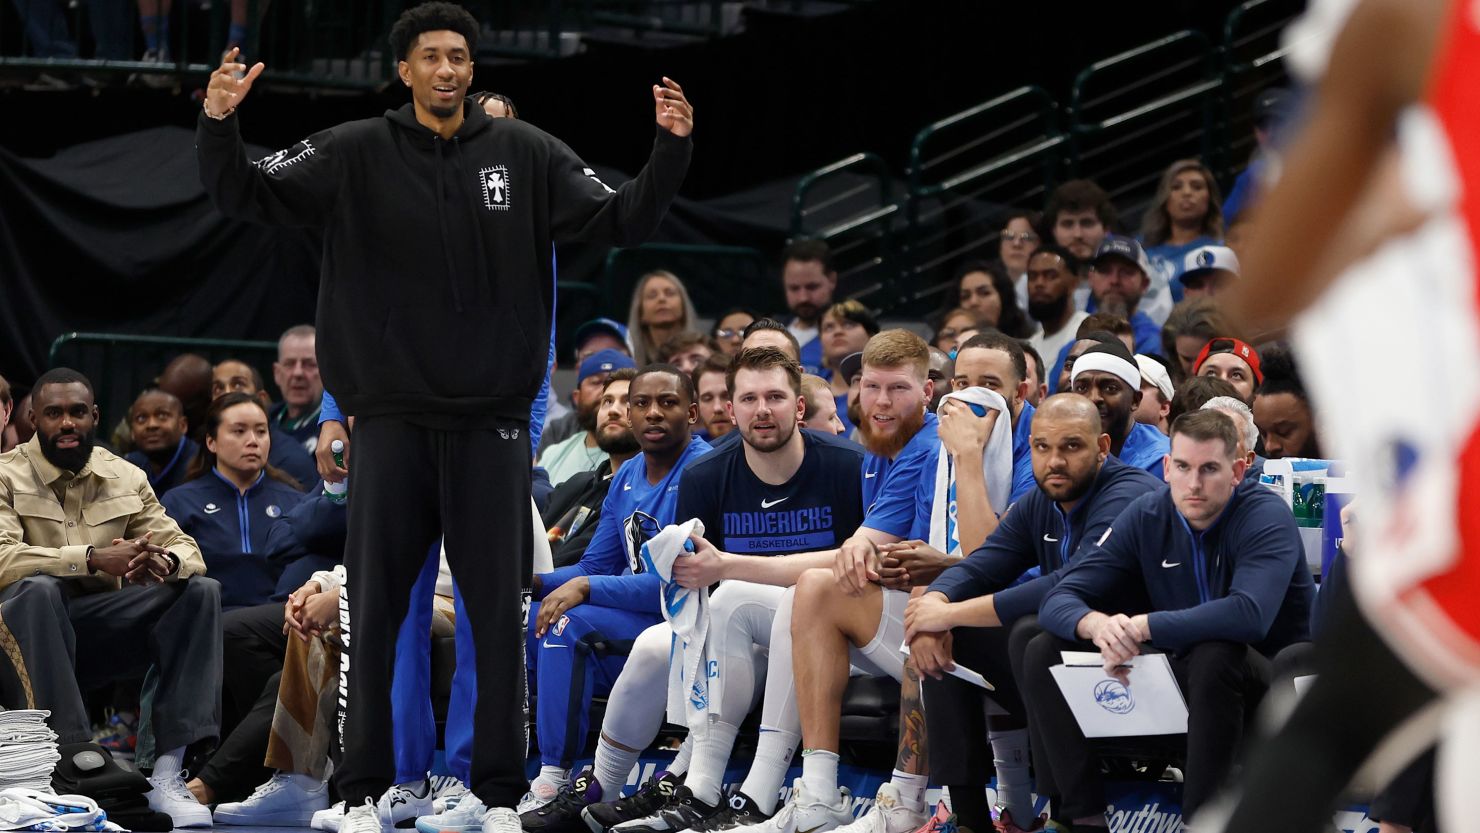 Luka Dončić (center) and the Mavericks bench watch on during the game against the Chicago Bulls.